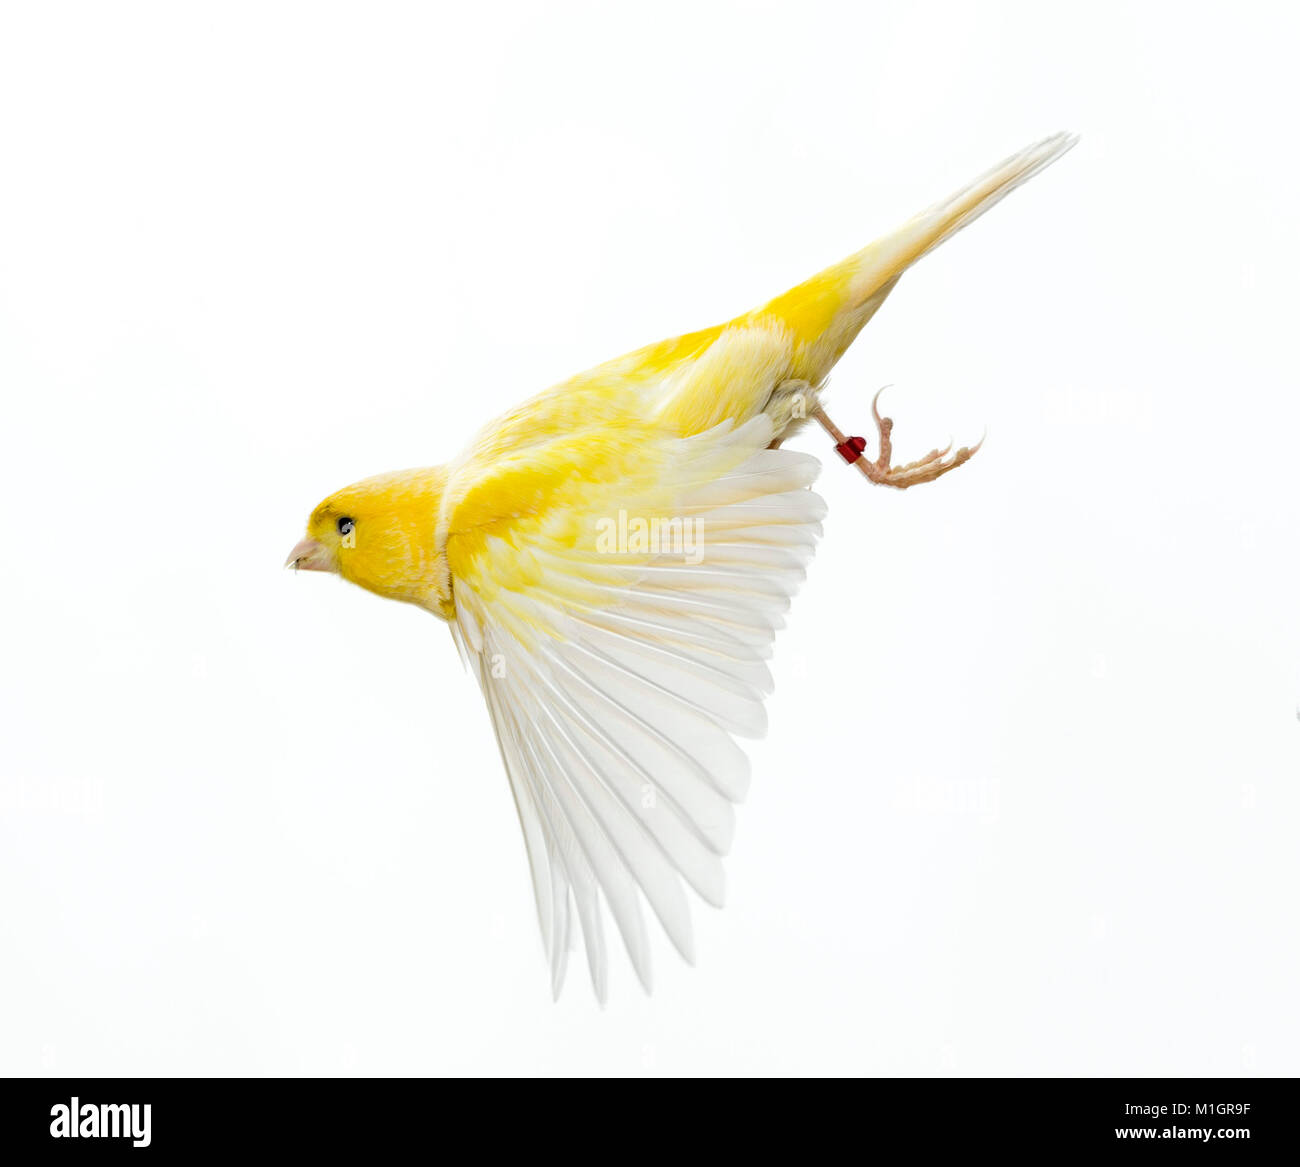 Domestic canary in flight, Studio picture against a white background Stock Photo